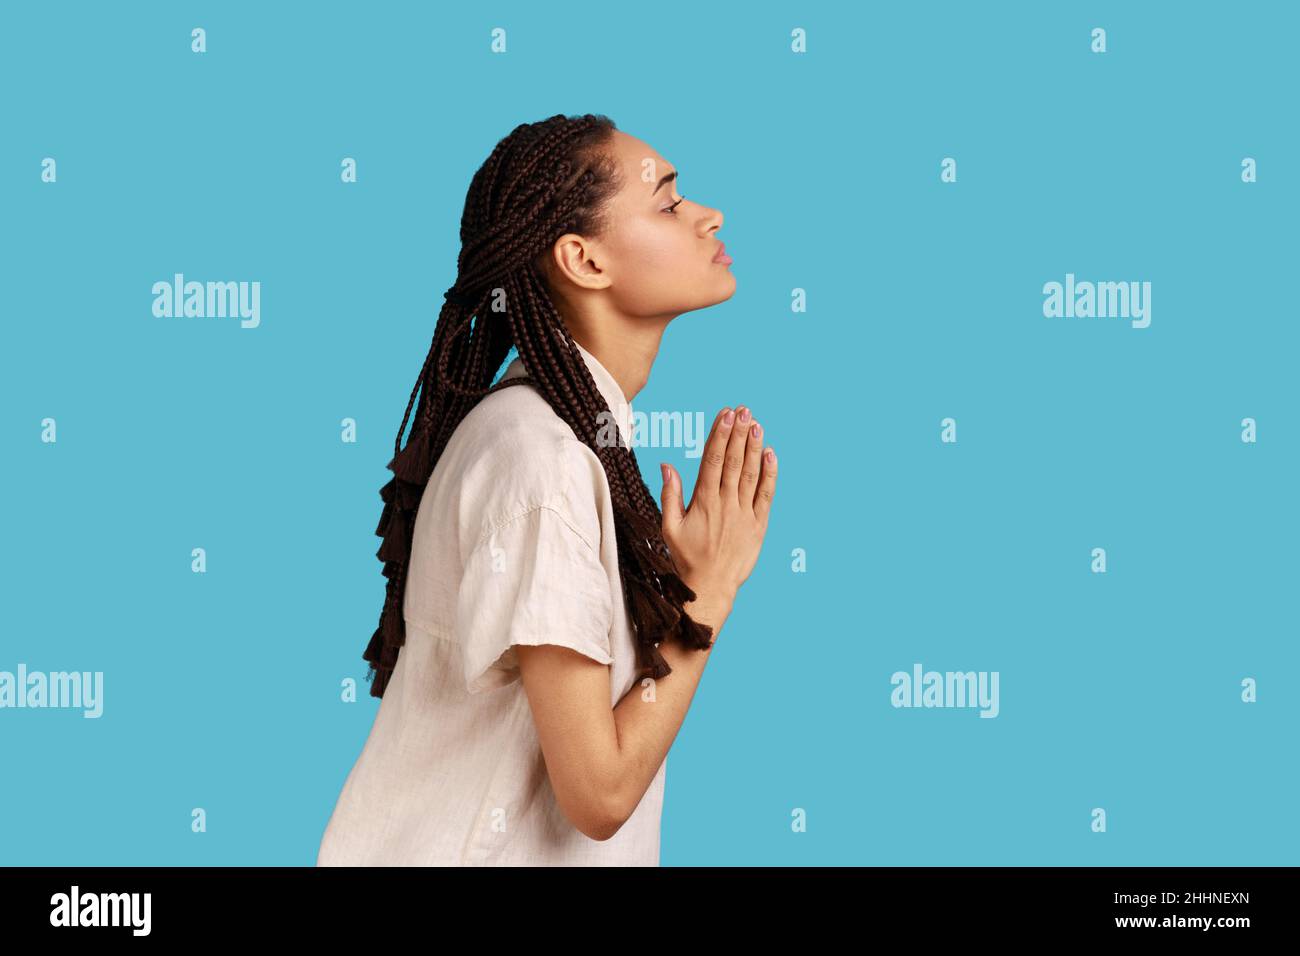 Side view of woman with dreadlocks keeps palms pressed together, pleading angel, has innocent expressions, asks for apologize, wearing white shirt. Indoor studio shot isolated on blue background. Stock Photo